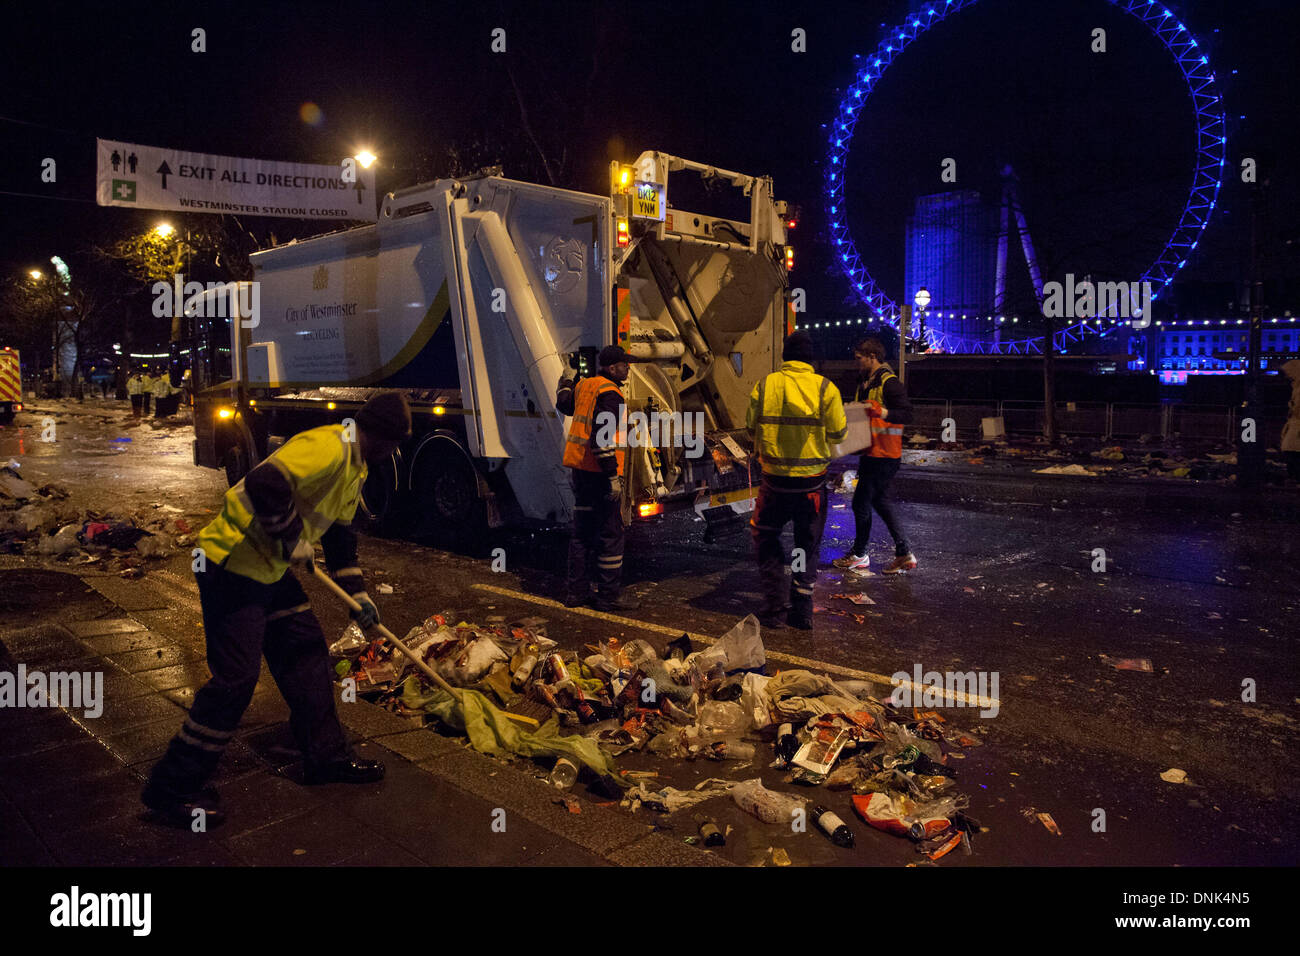 London, UK. 1st January 2014. More than 250,000 people turned out to watch the fireworks, with the council mounting a huge clean-up operation today to get London back to its best. Credit:  nelson pereira/Alamy Live News Stock Photo